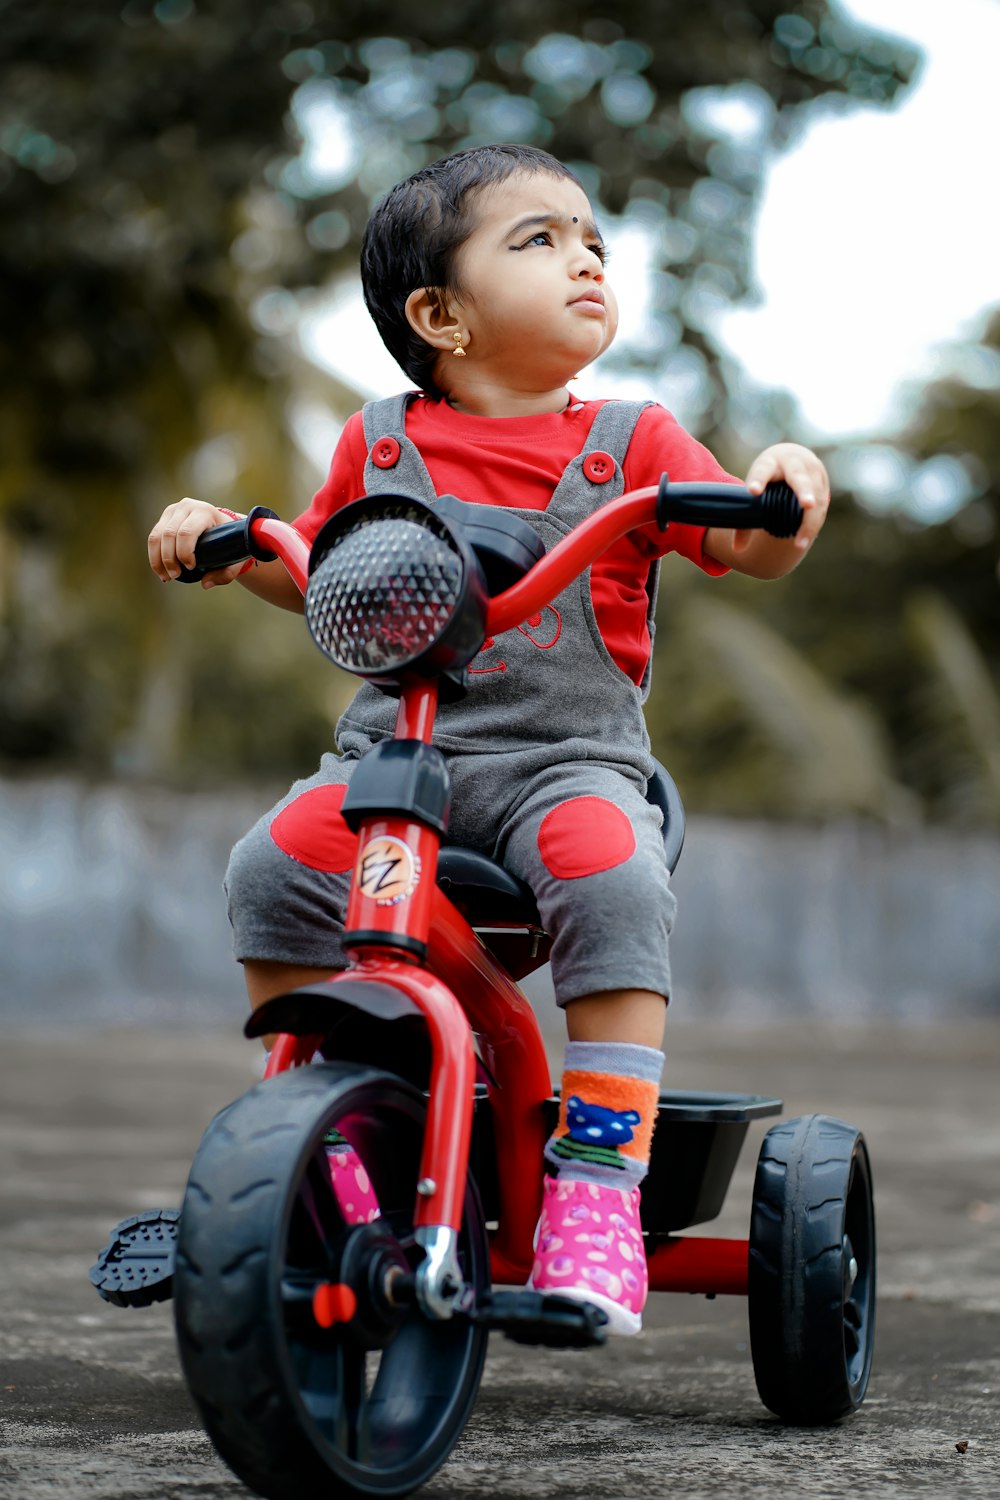 child in red shirt riding red and black motorcycle toy